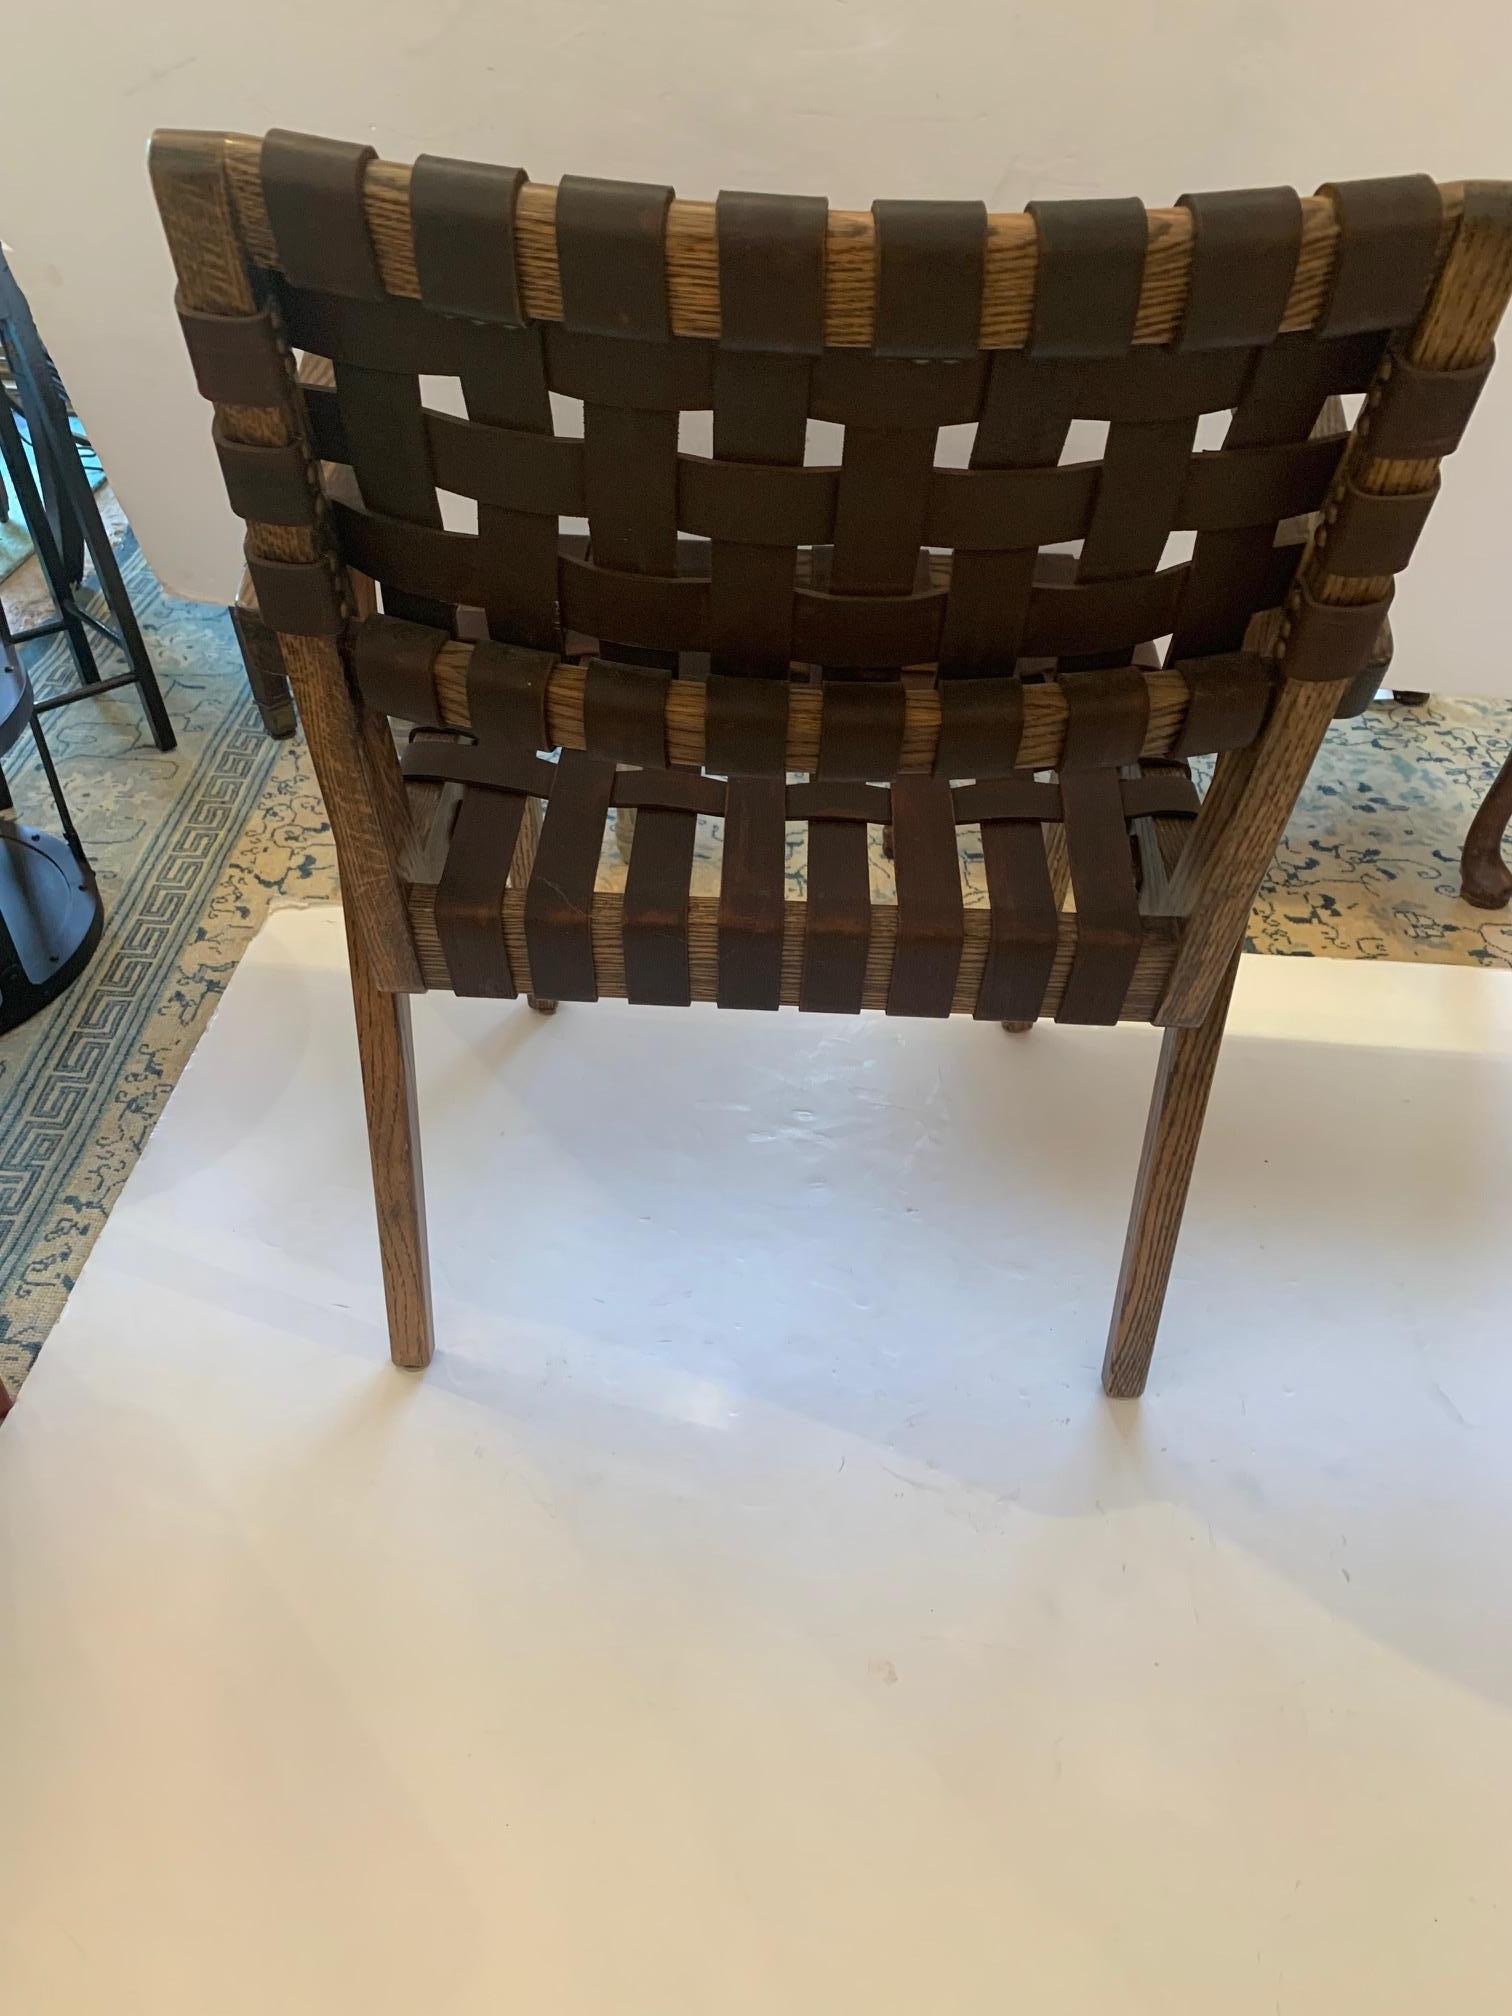 woven leather dining chair